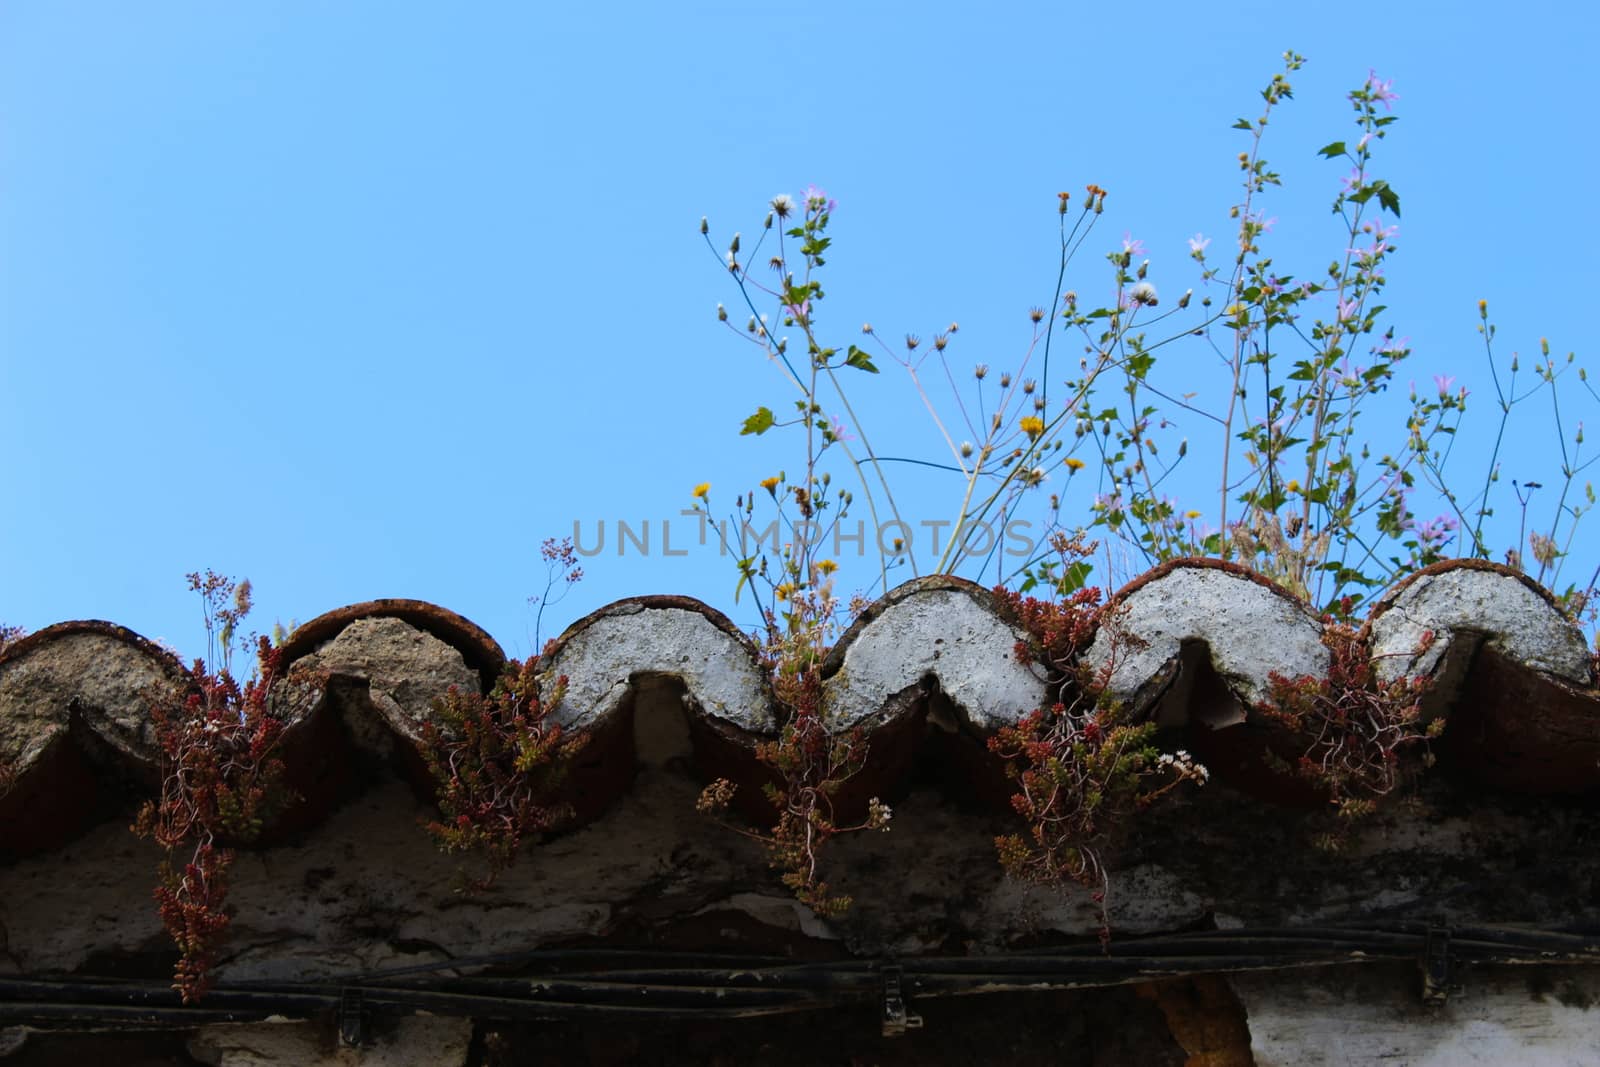 The plants grow on an abandoned old roof. Beja, Portugal.